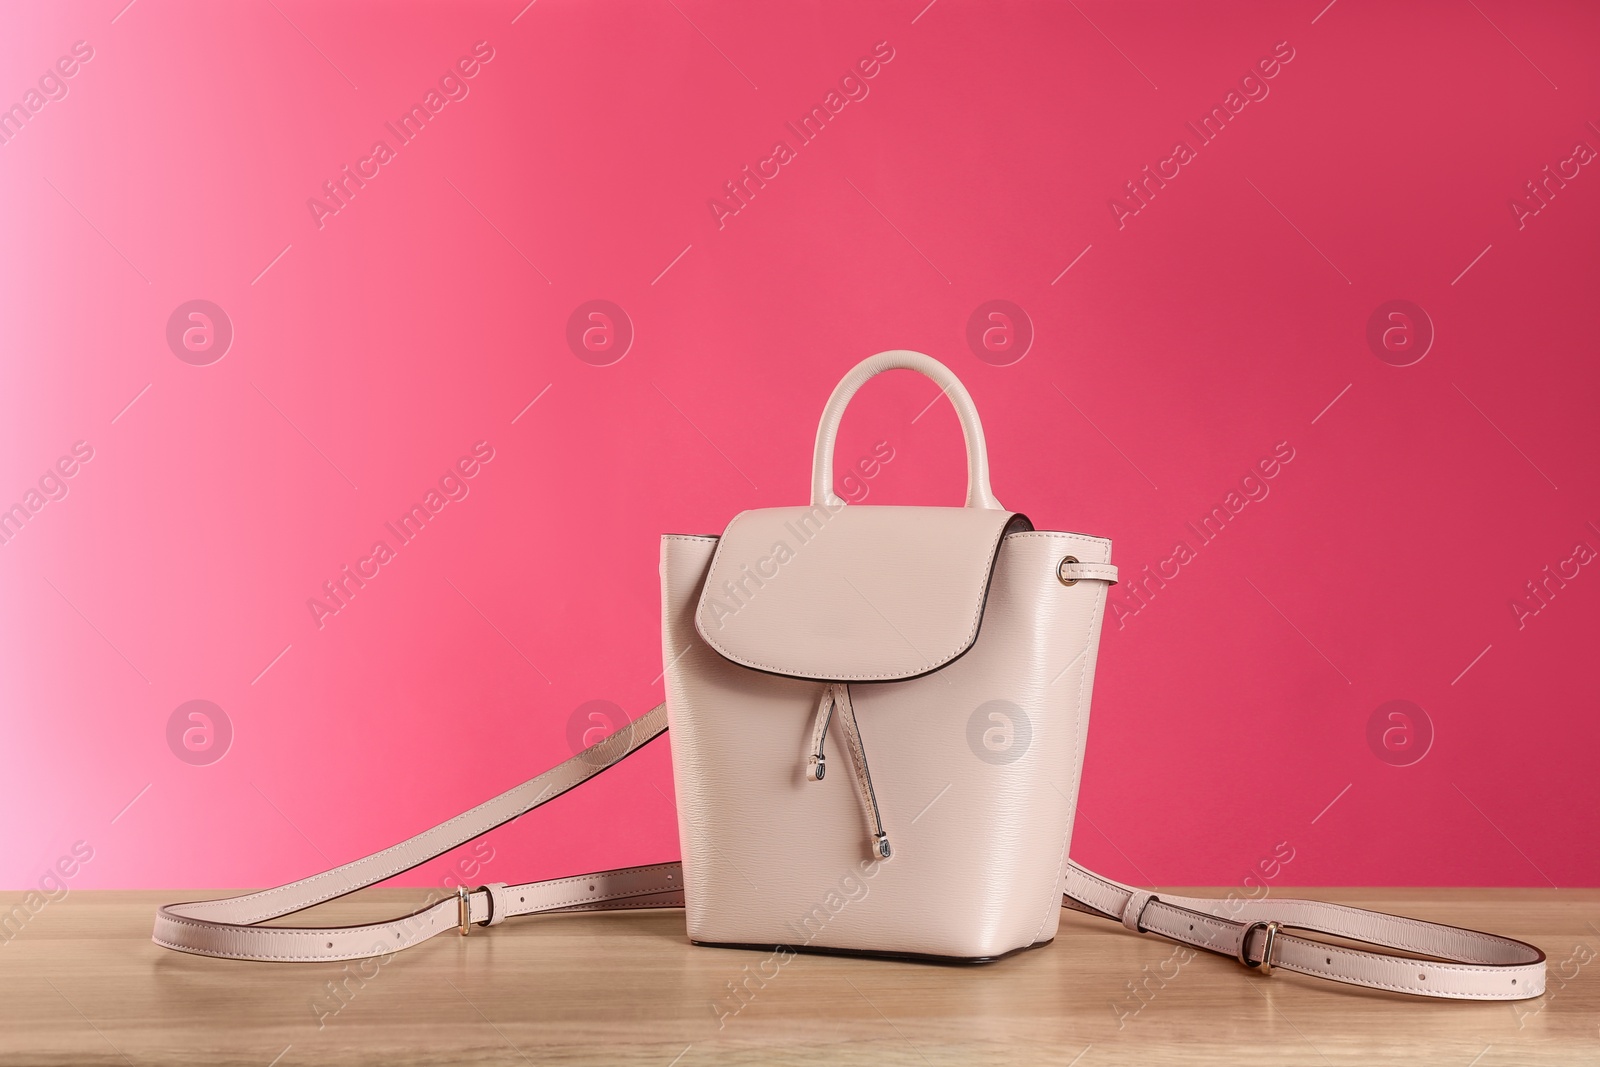 Photo of Stylish woman's bag on wooden table against pink background